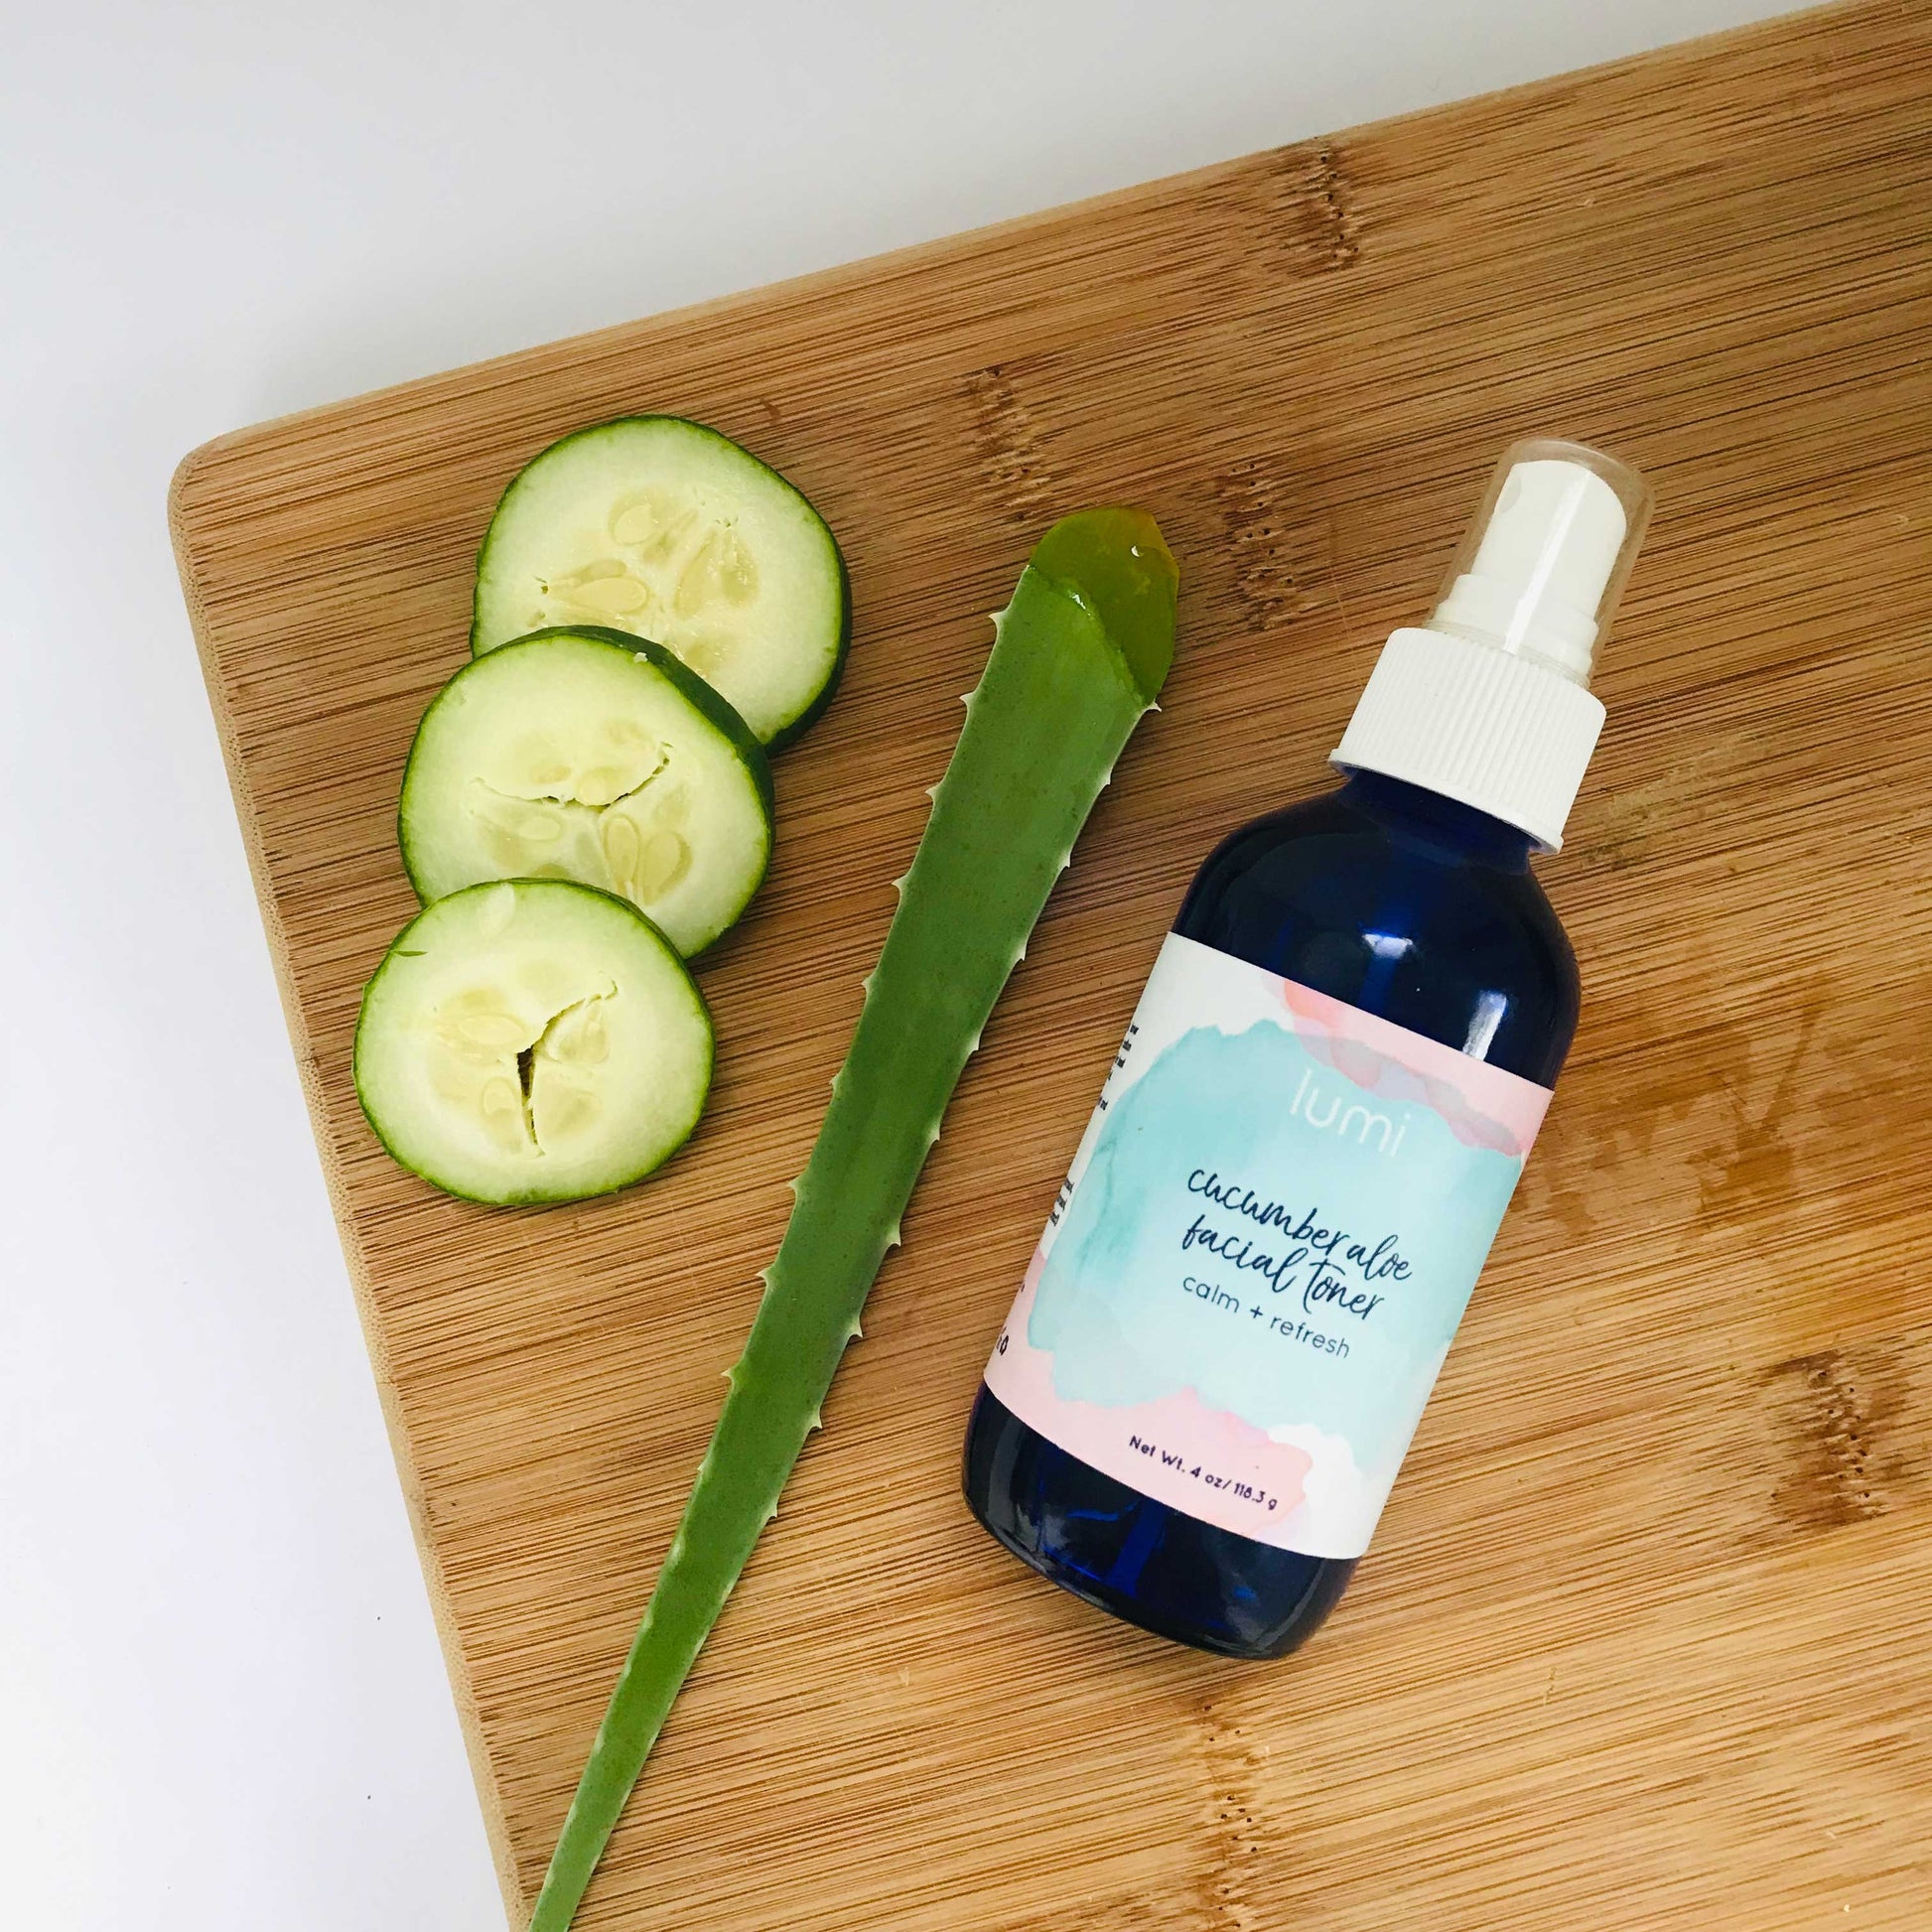 cucumber toner on board with cucumber and aloe